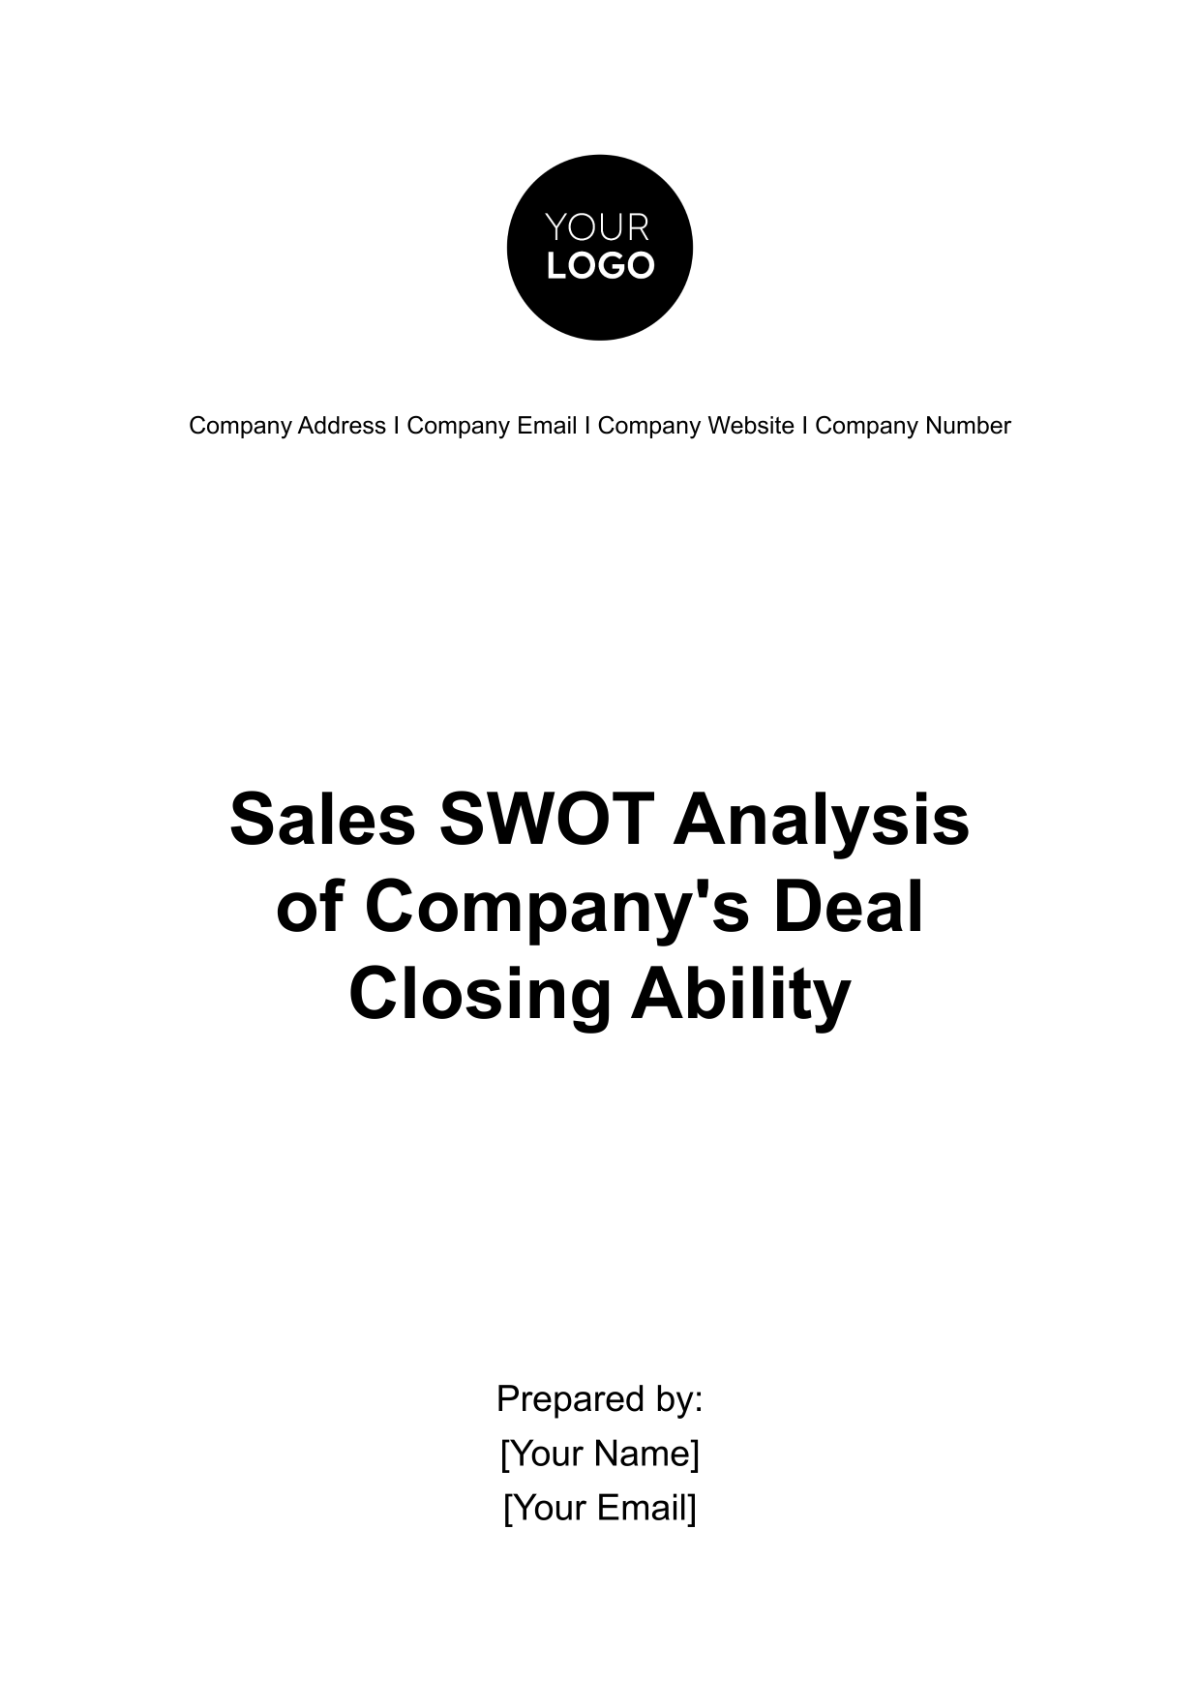 Sales SWOT Analysis of Company's Deal Closing Ability Template